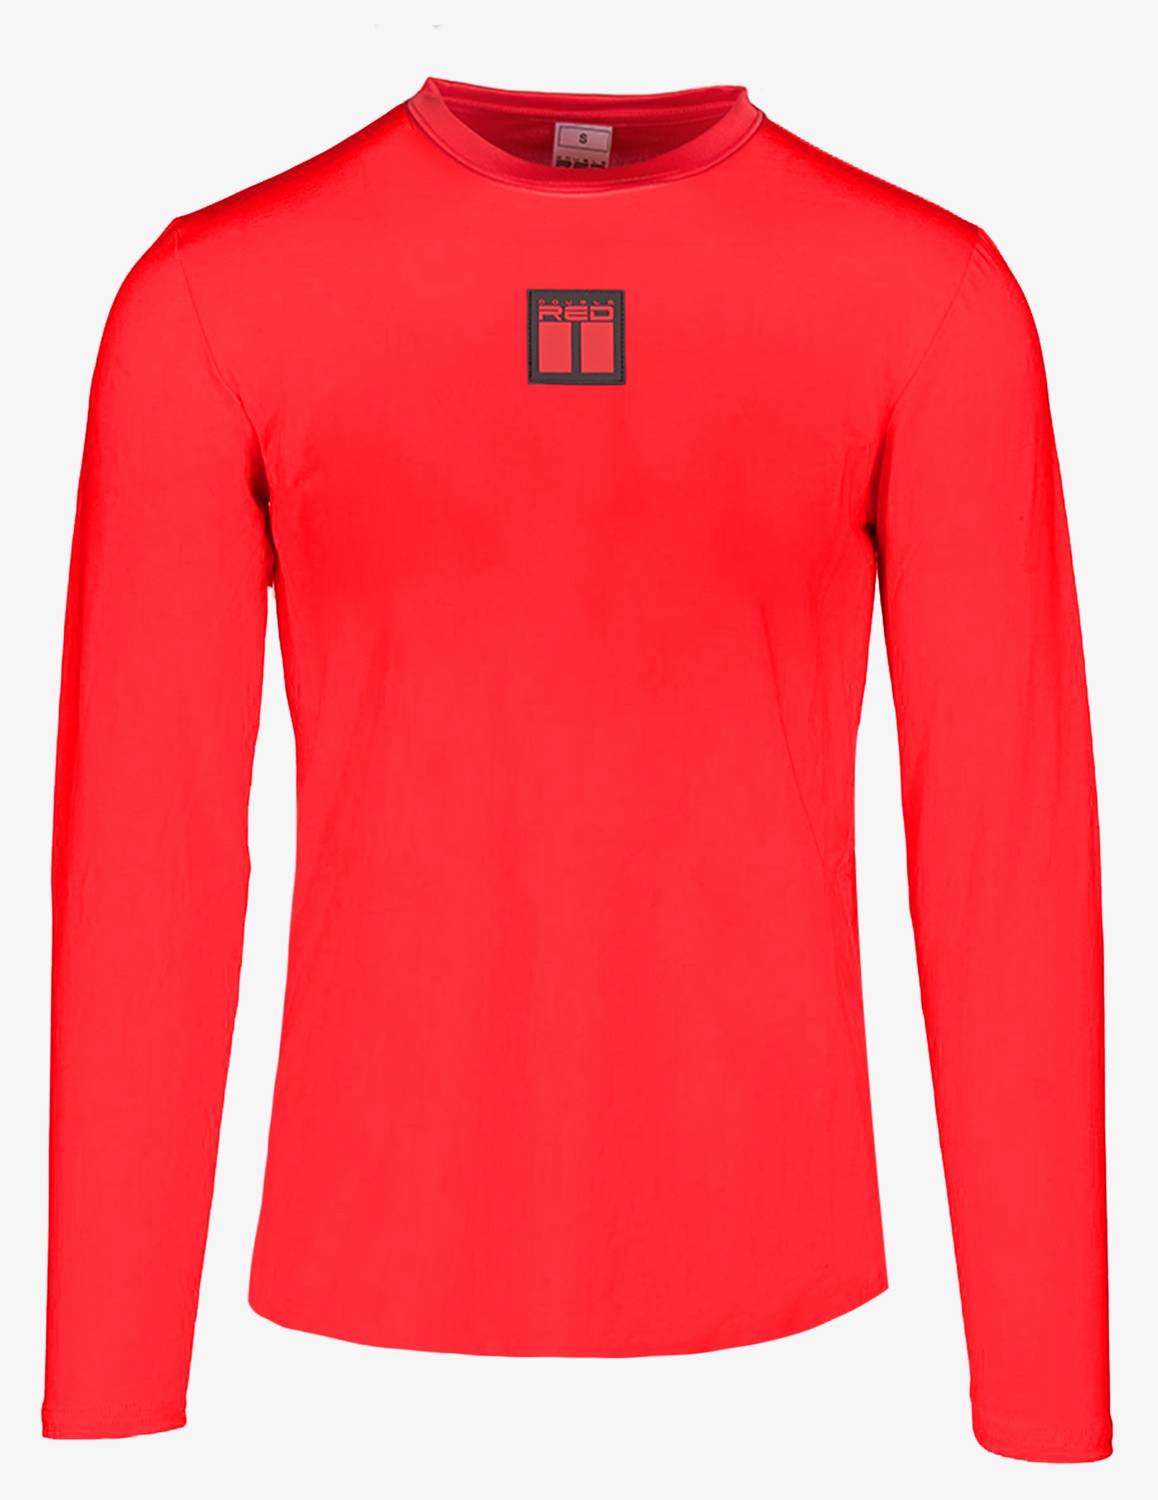 Unisex T-shirt SPORT IS YOUR GANG™ FIT+ Red